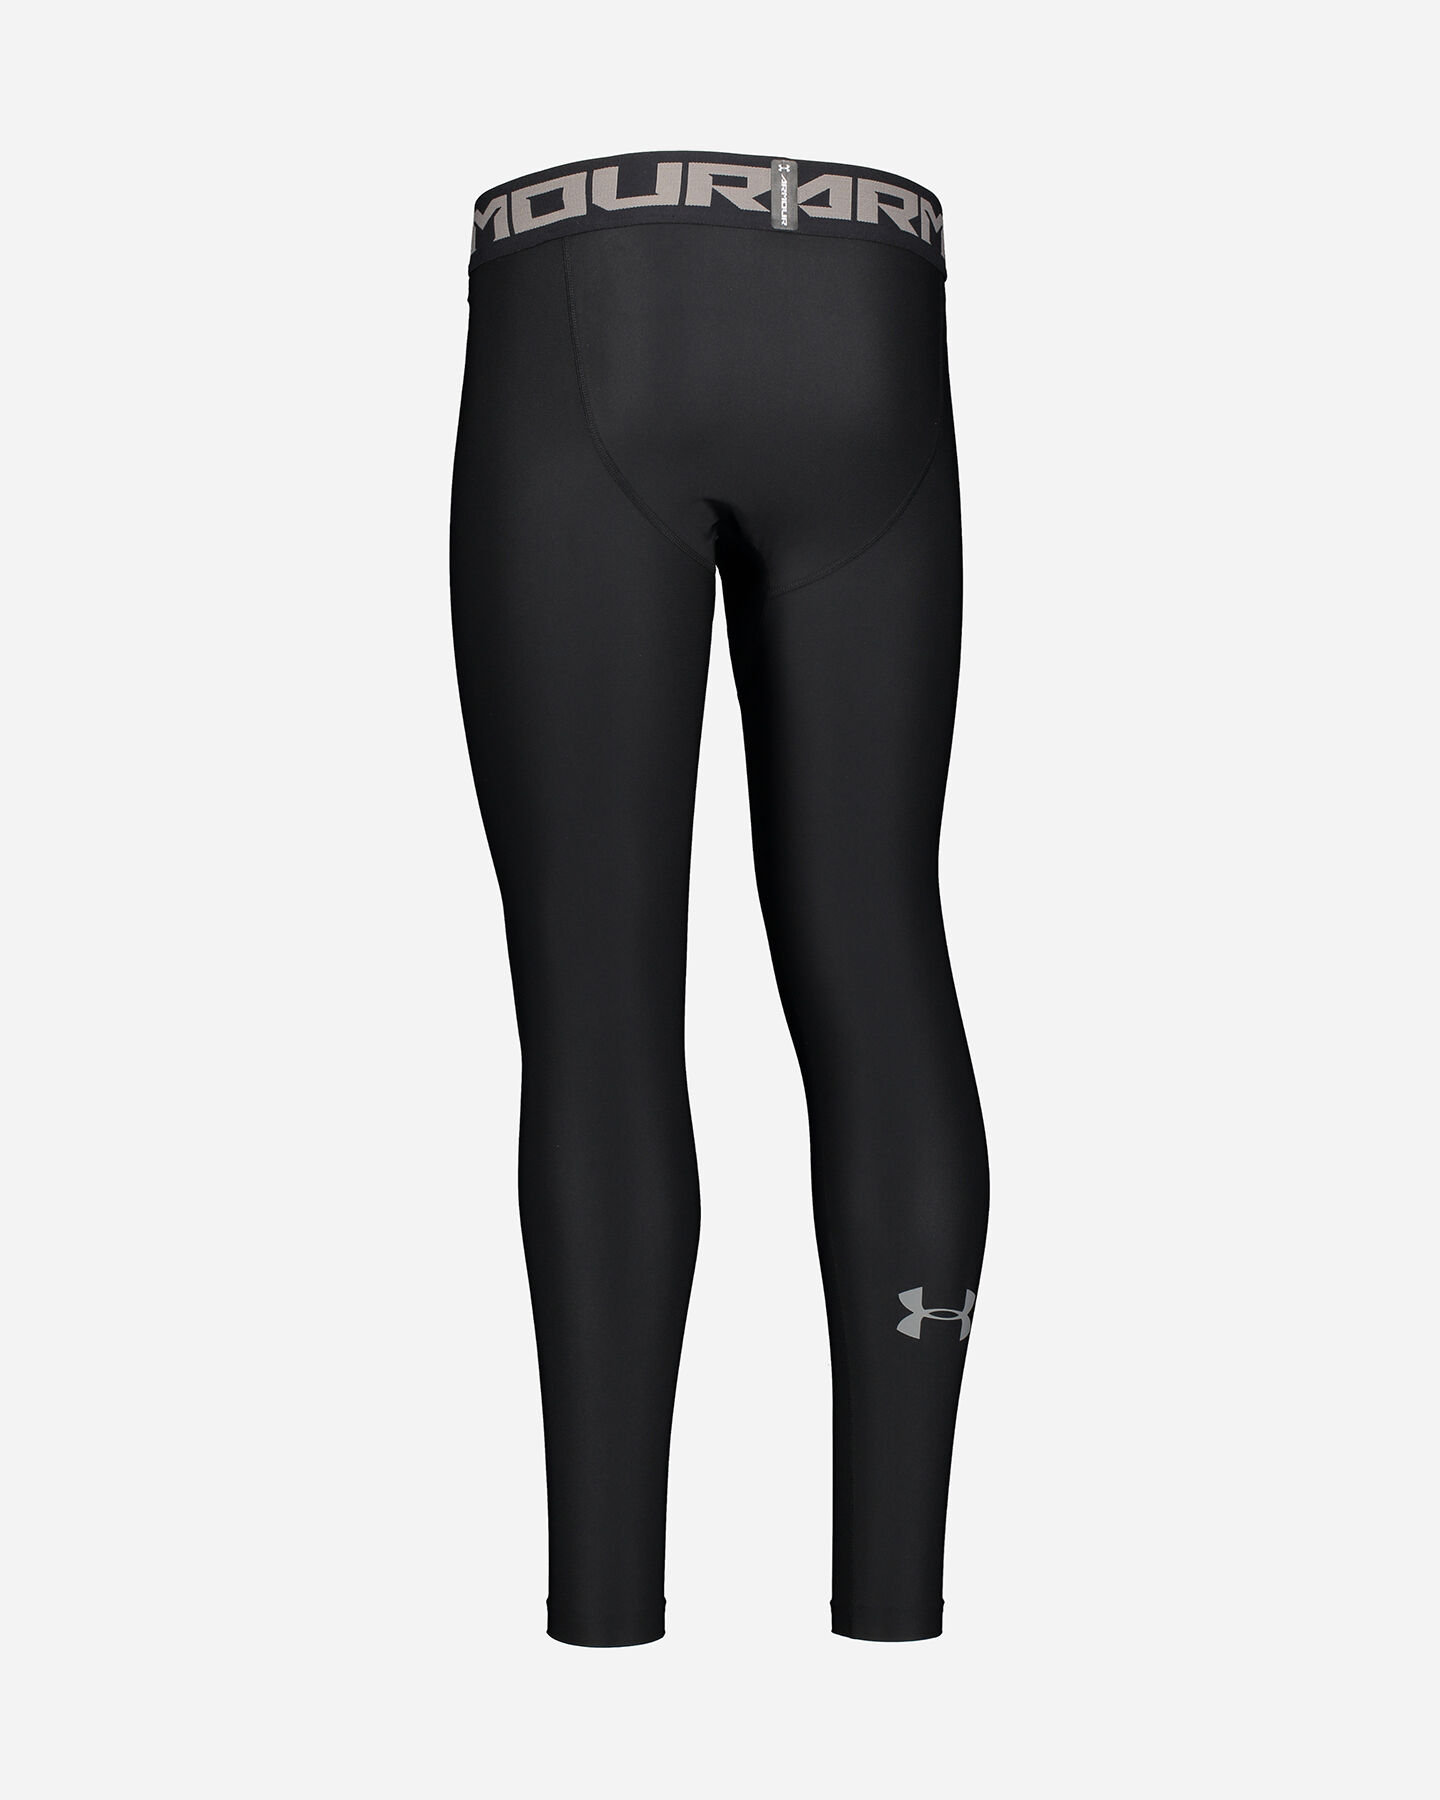  Pantalone training UNDER ARMOUR HG 2.0 M S5031436|0001|SM scatto 2